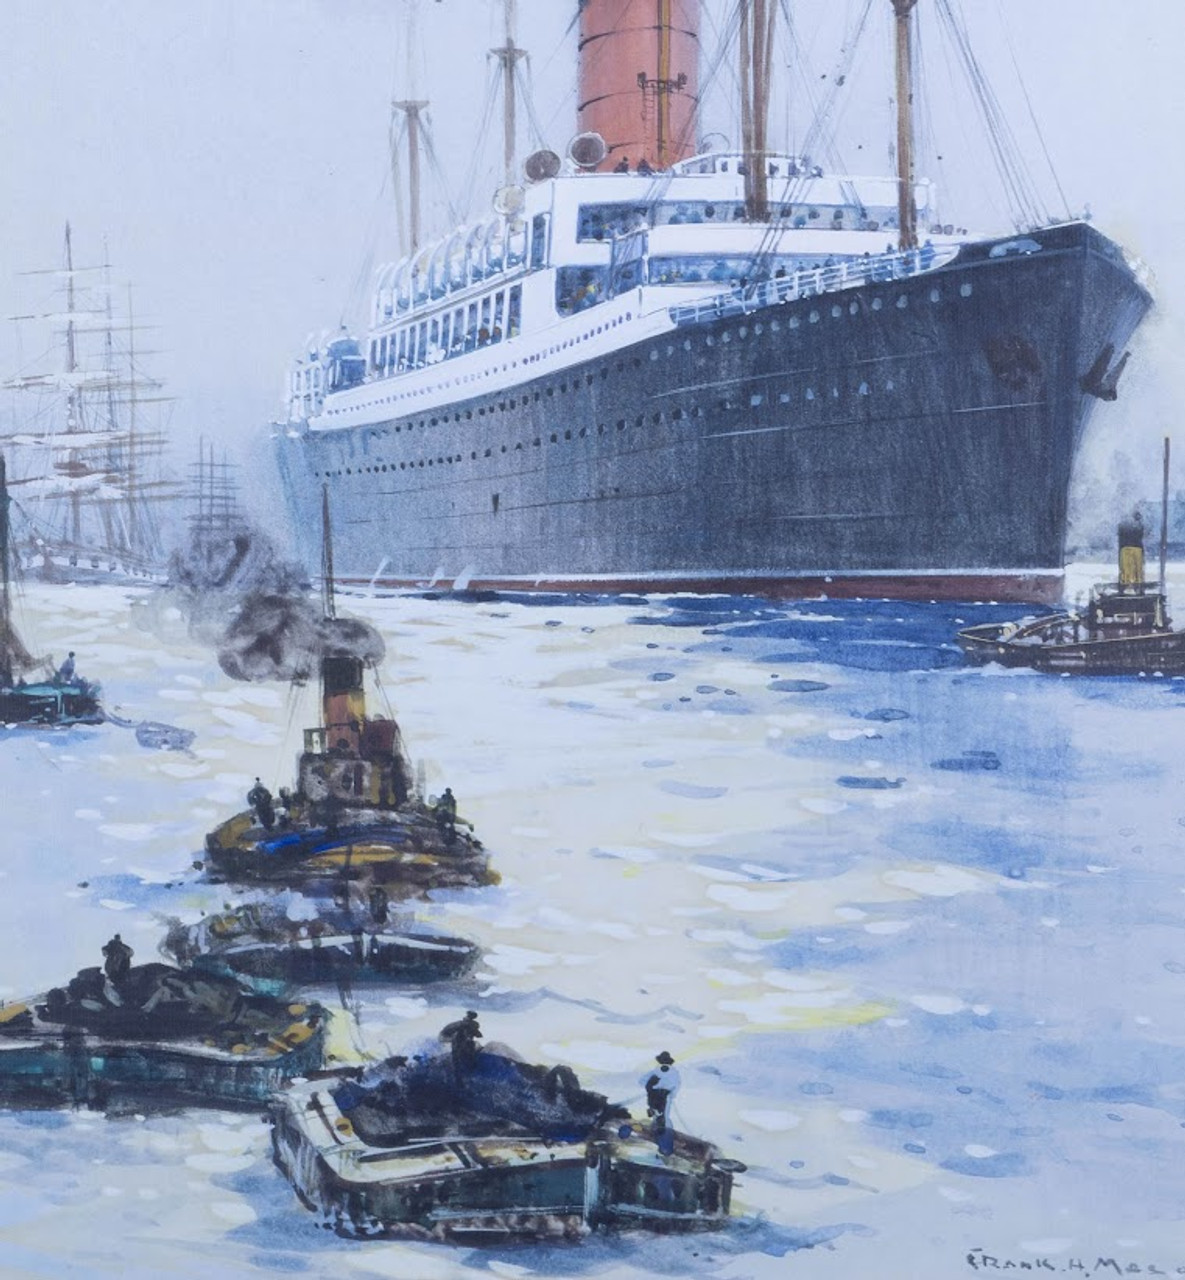  Nautical Canvas Print - The Cunard Liner Carpathia Outward Bound from Liverpool in the Moonlight - Closeup 2